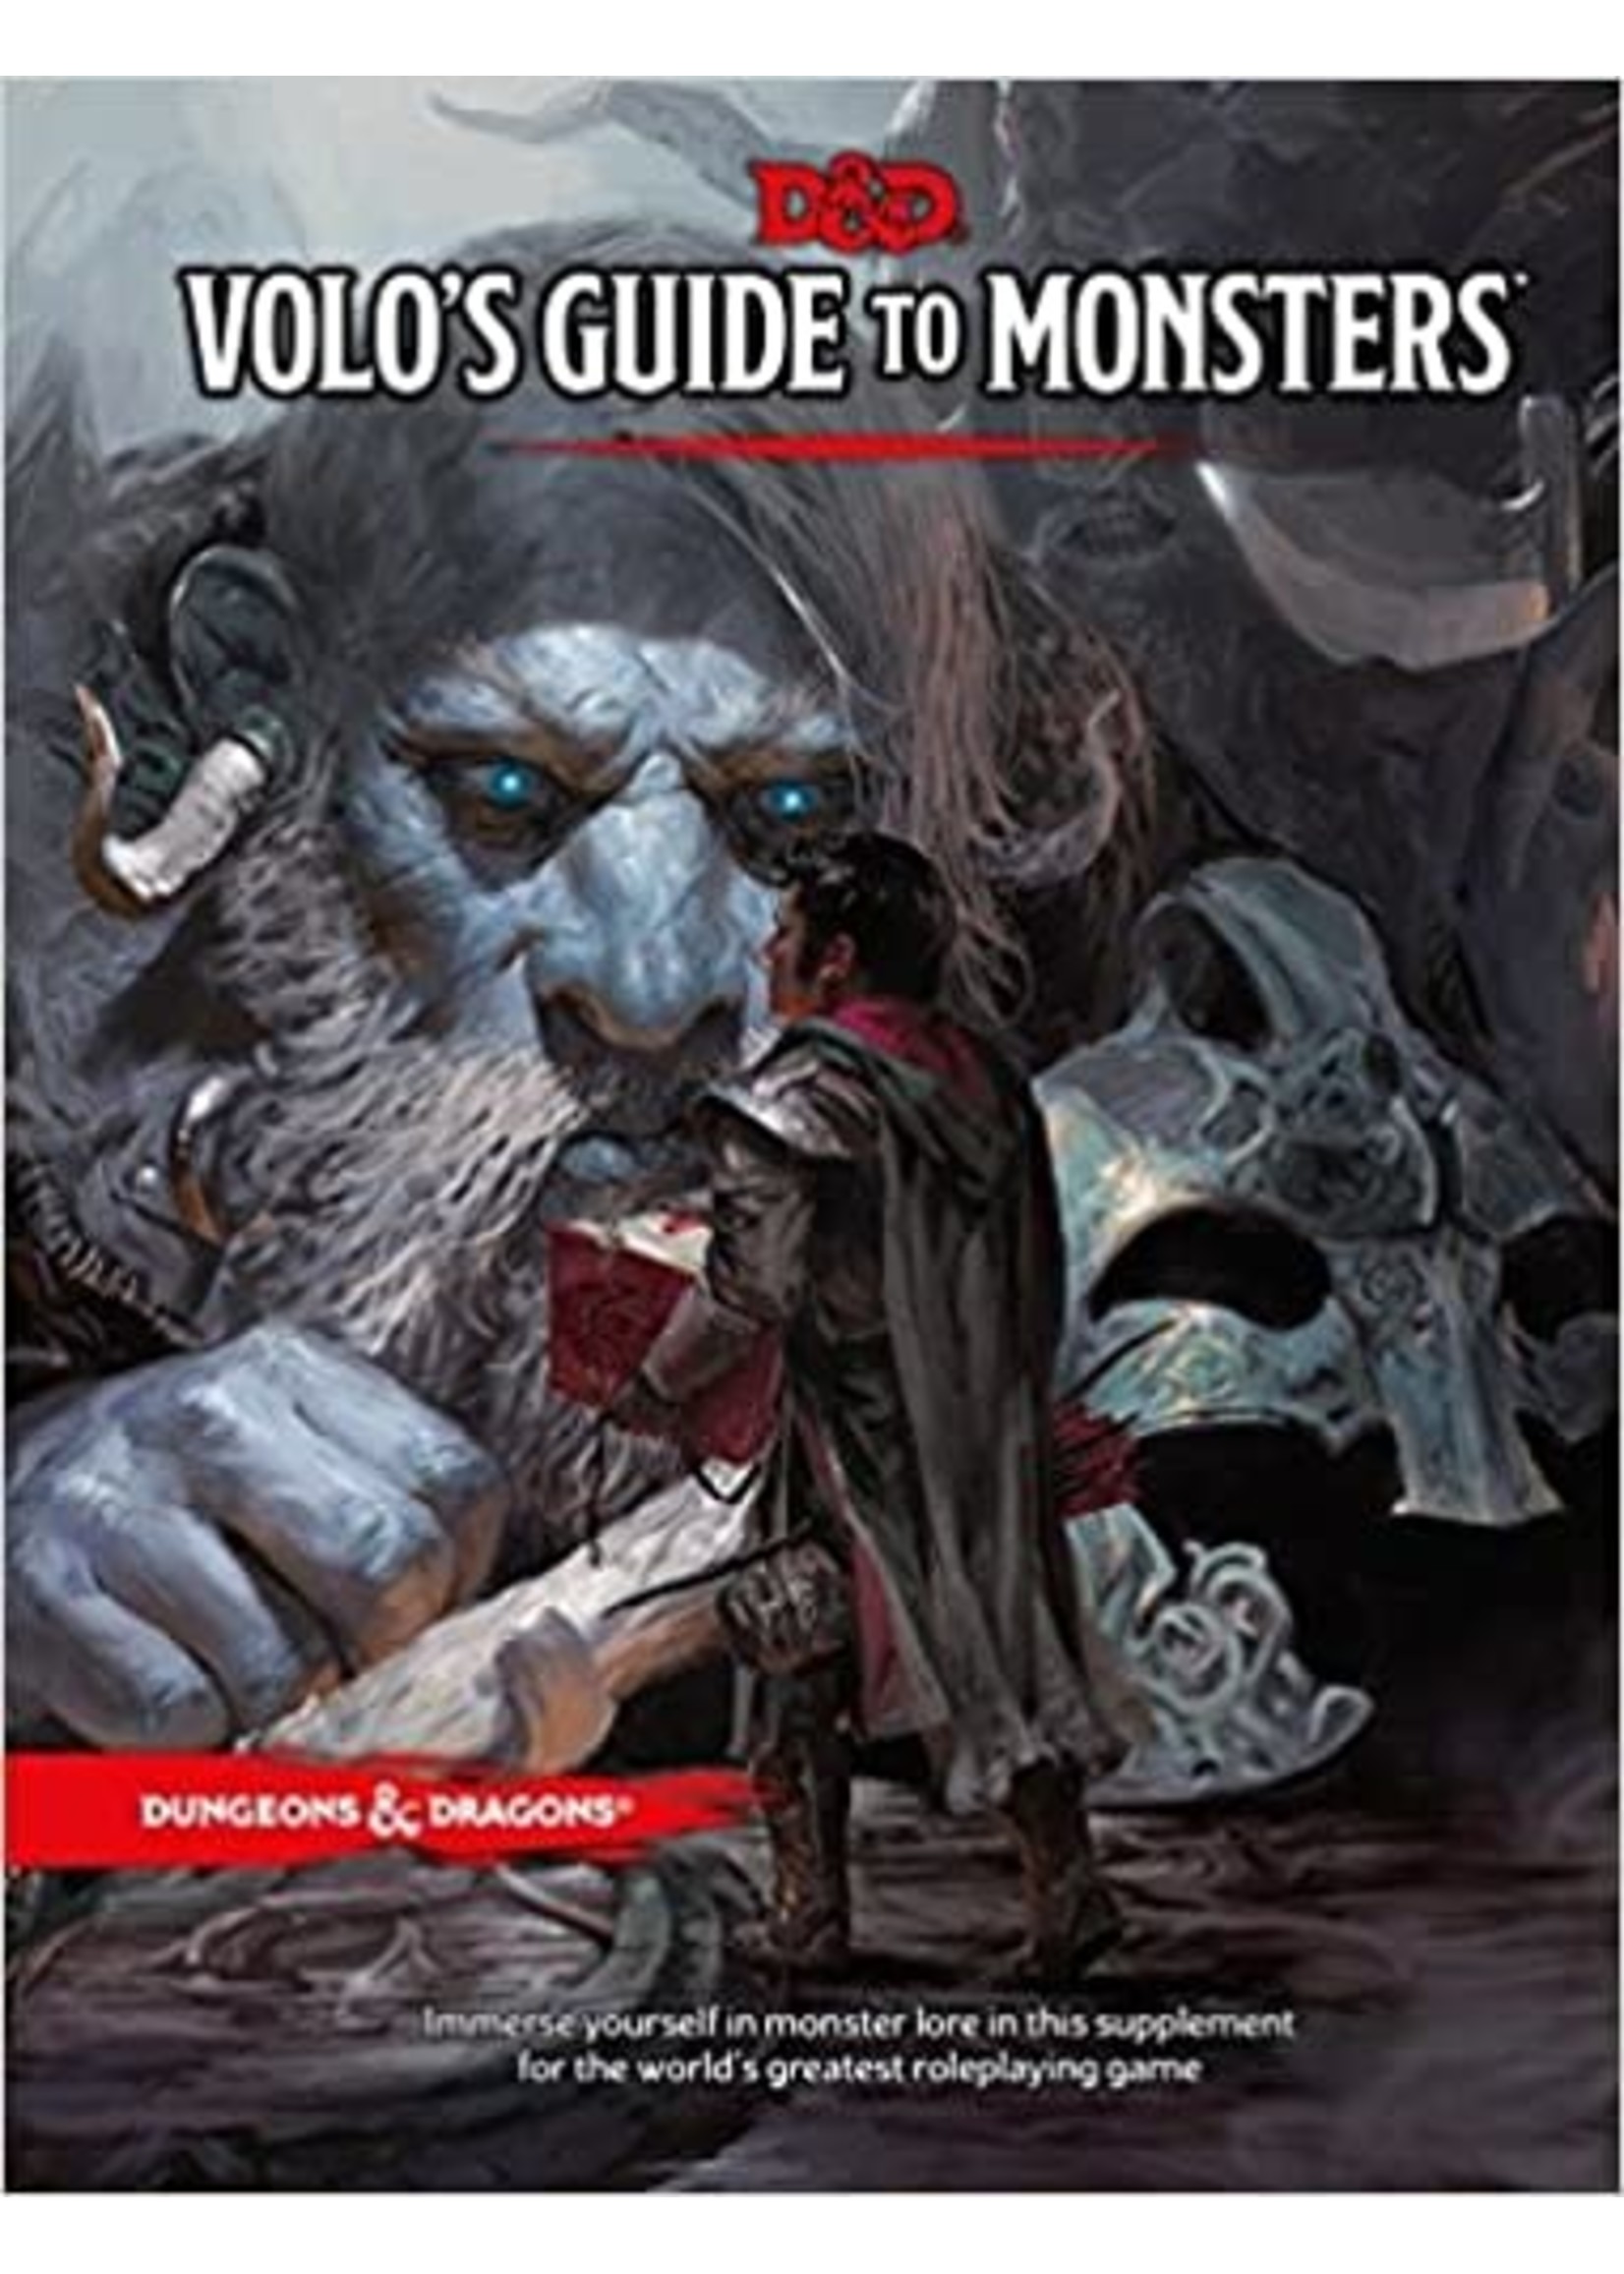 Dungeons & Dragons D&D - Volo's guide to monsters